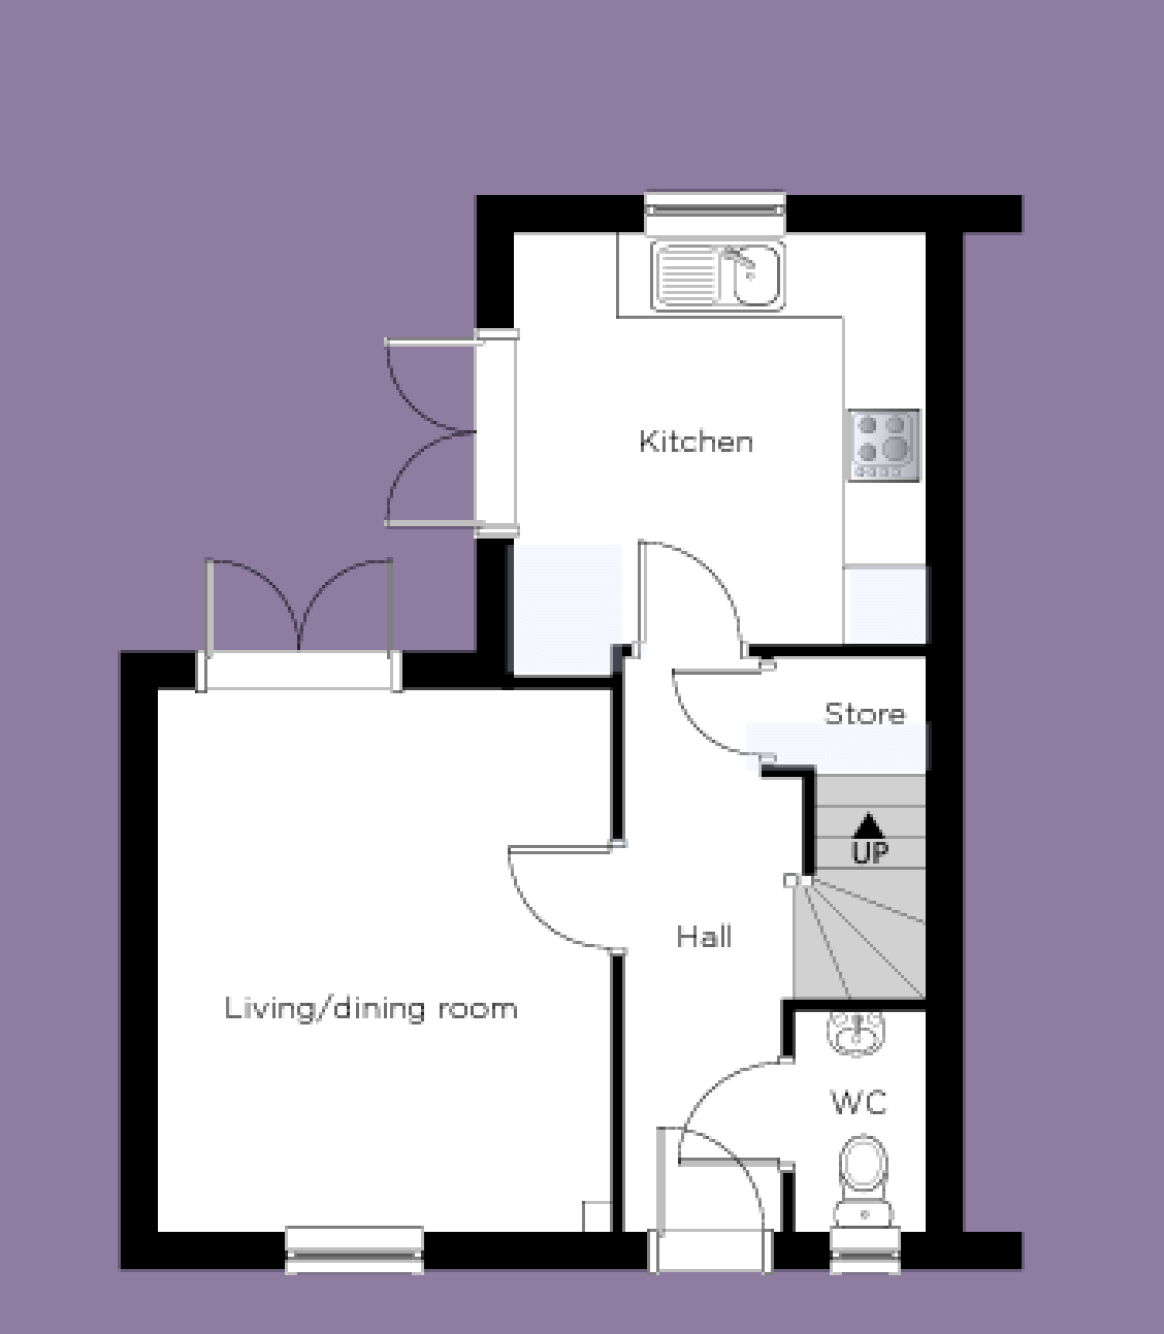 Ground Floor Plan of The Malvern at Waltham on the Wolds.